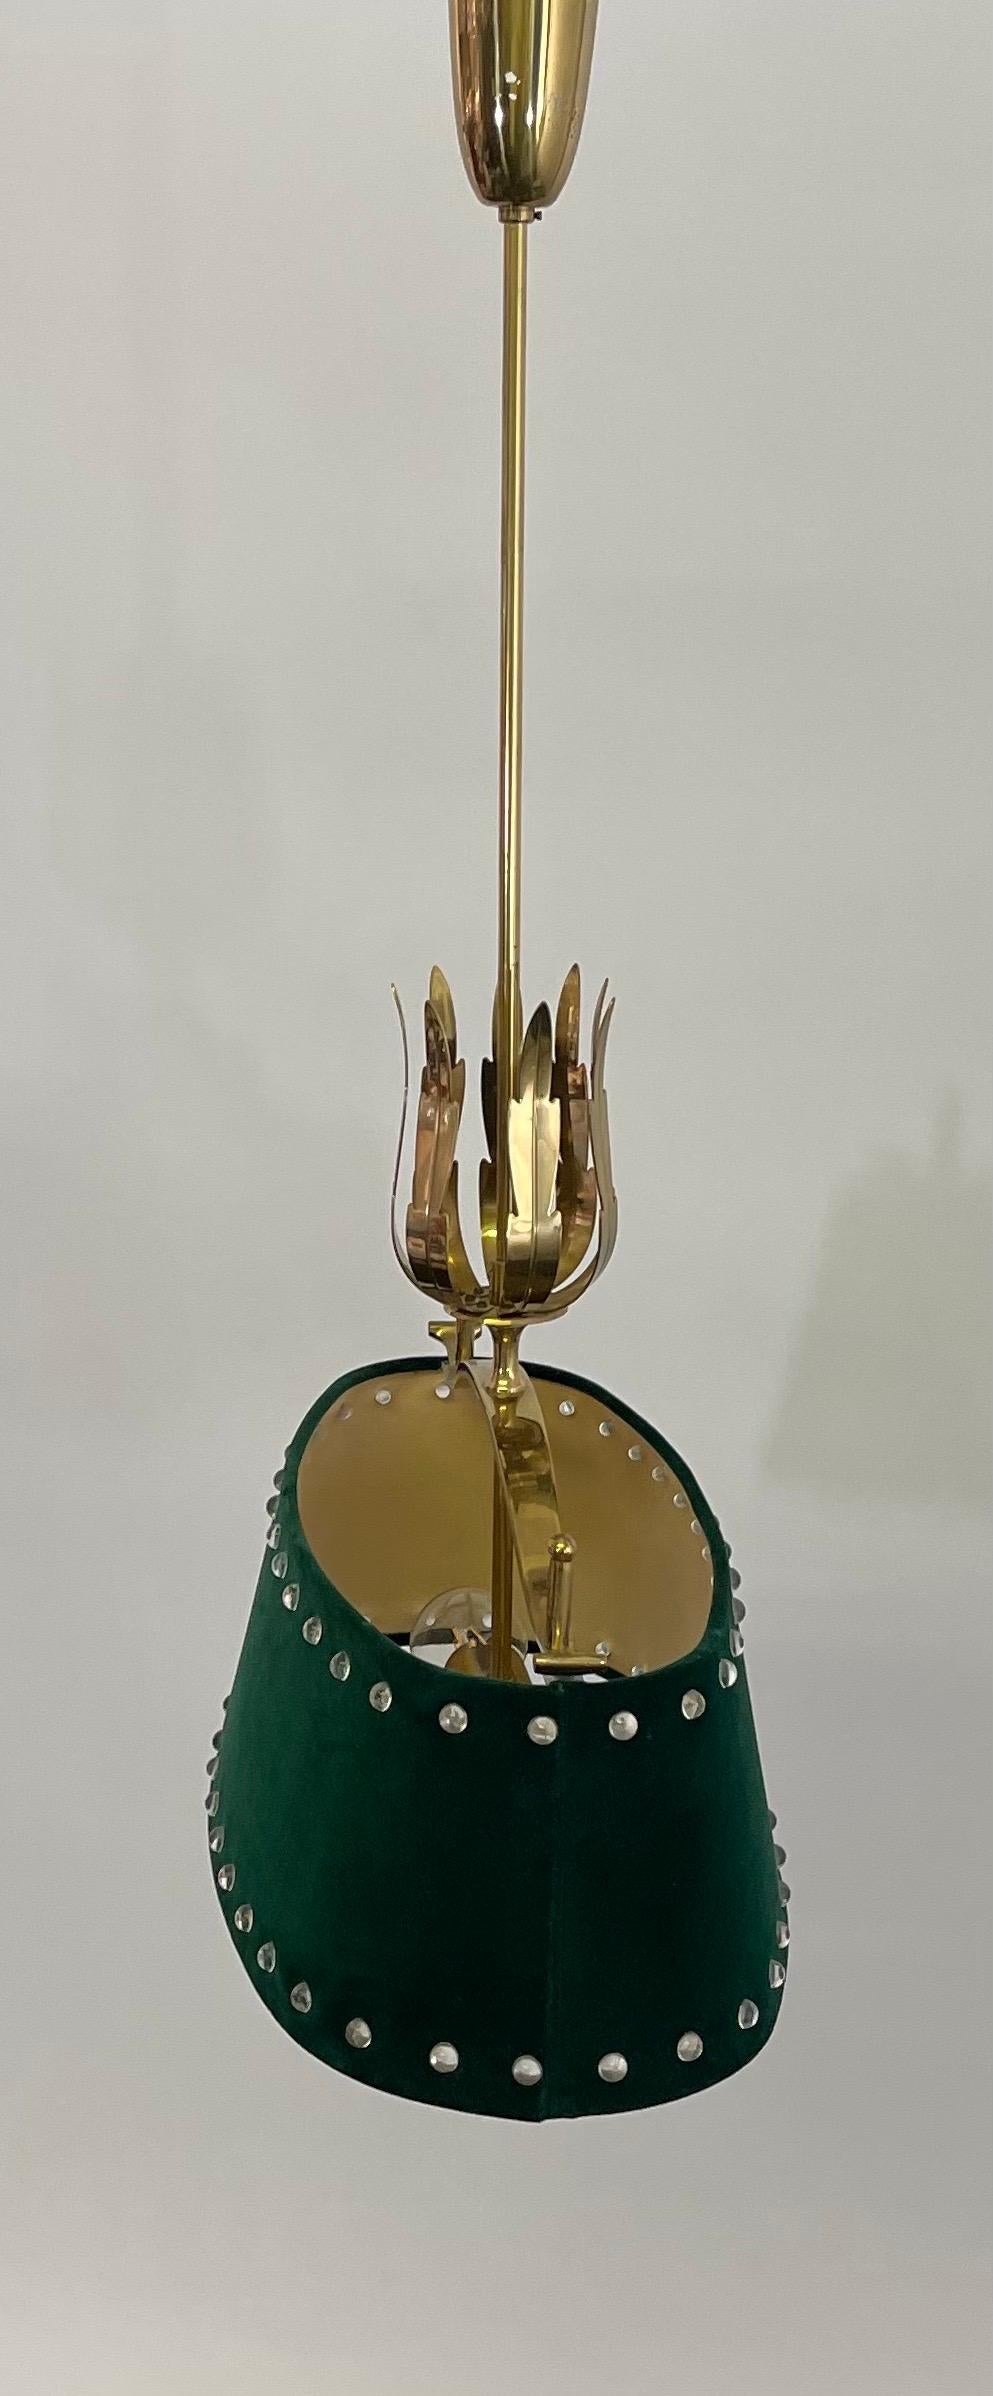 Mid-Century Polished Brass and Green Felt Pendant Light, circa 1950s For Sale 4